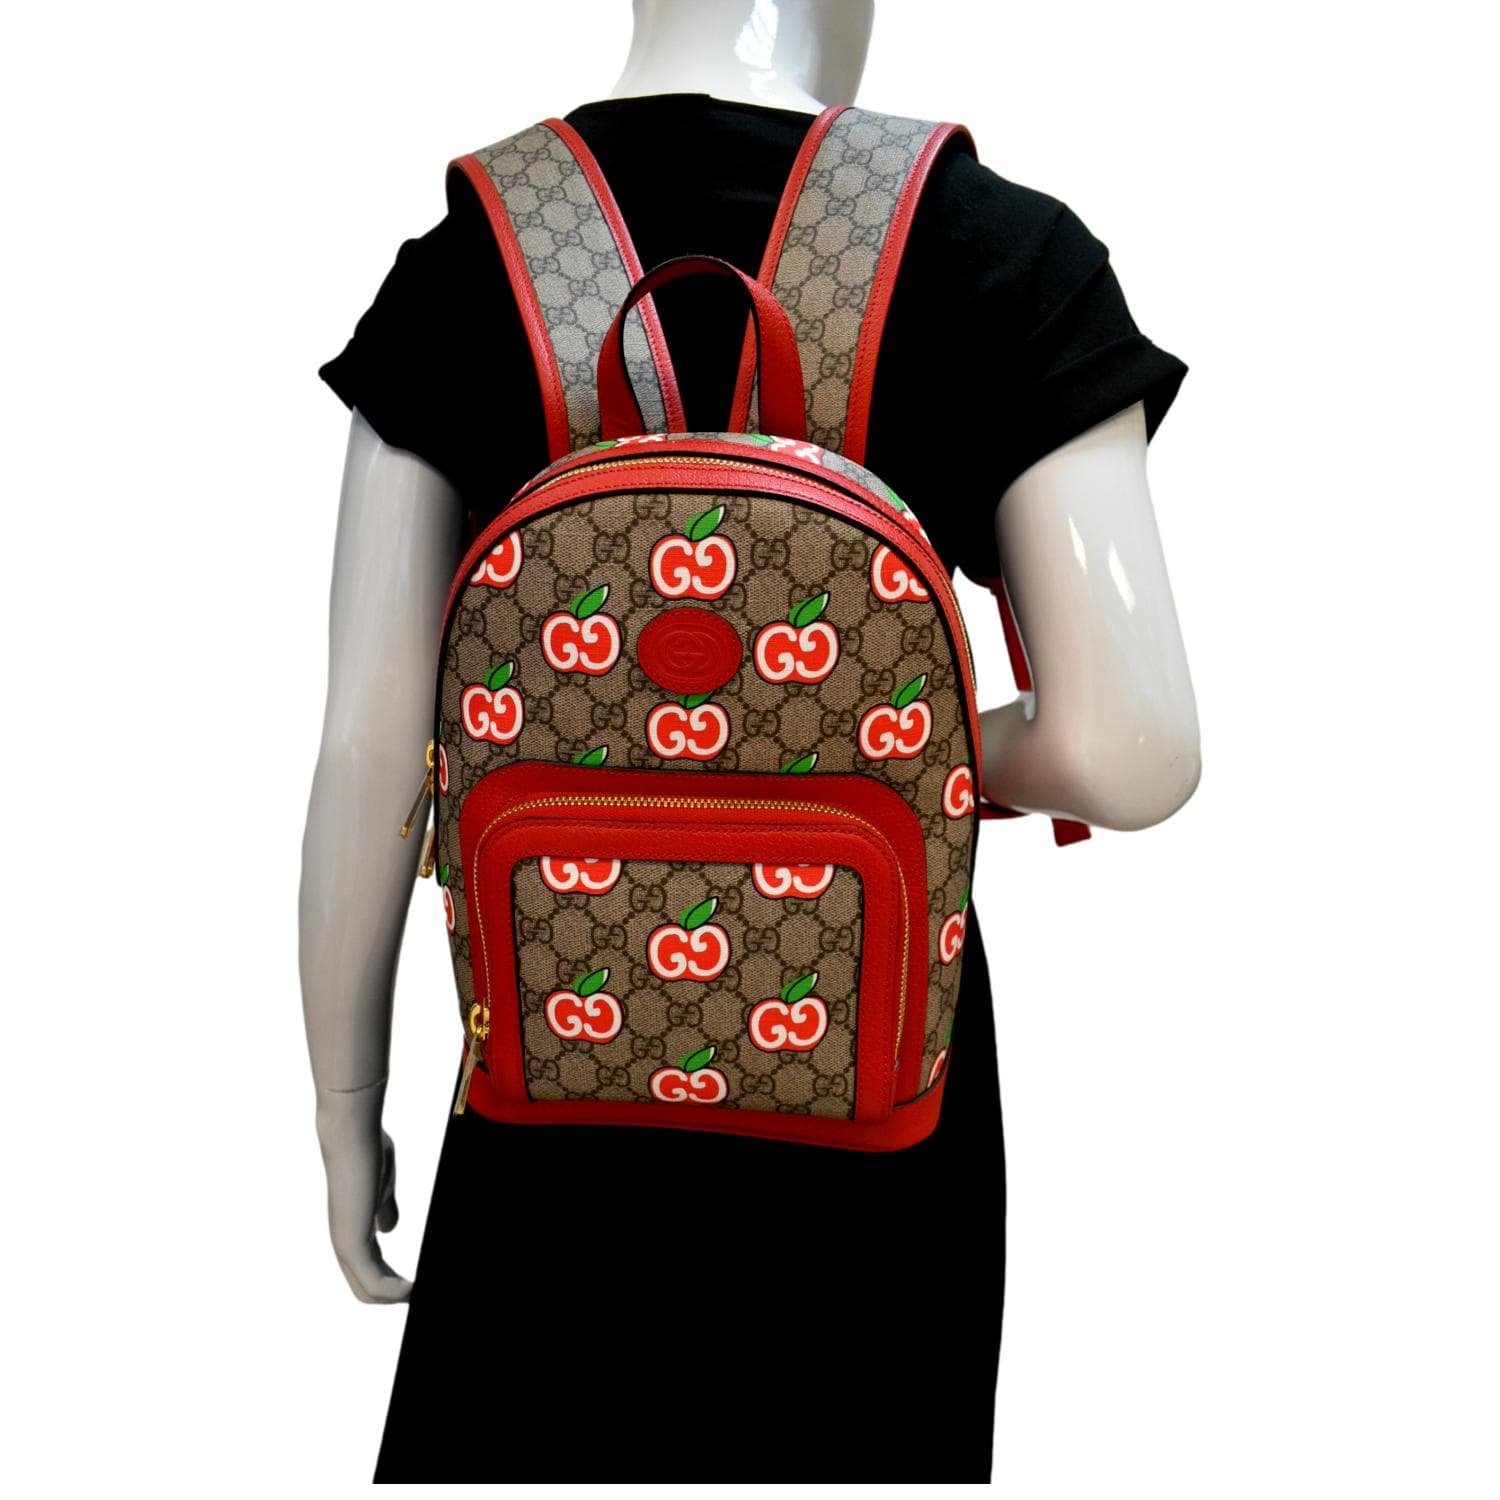 Gucci 2021 Multicolor GG Canvas Backpack - Red Backpacks, Bags - GUC926833